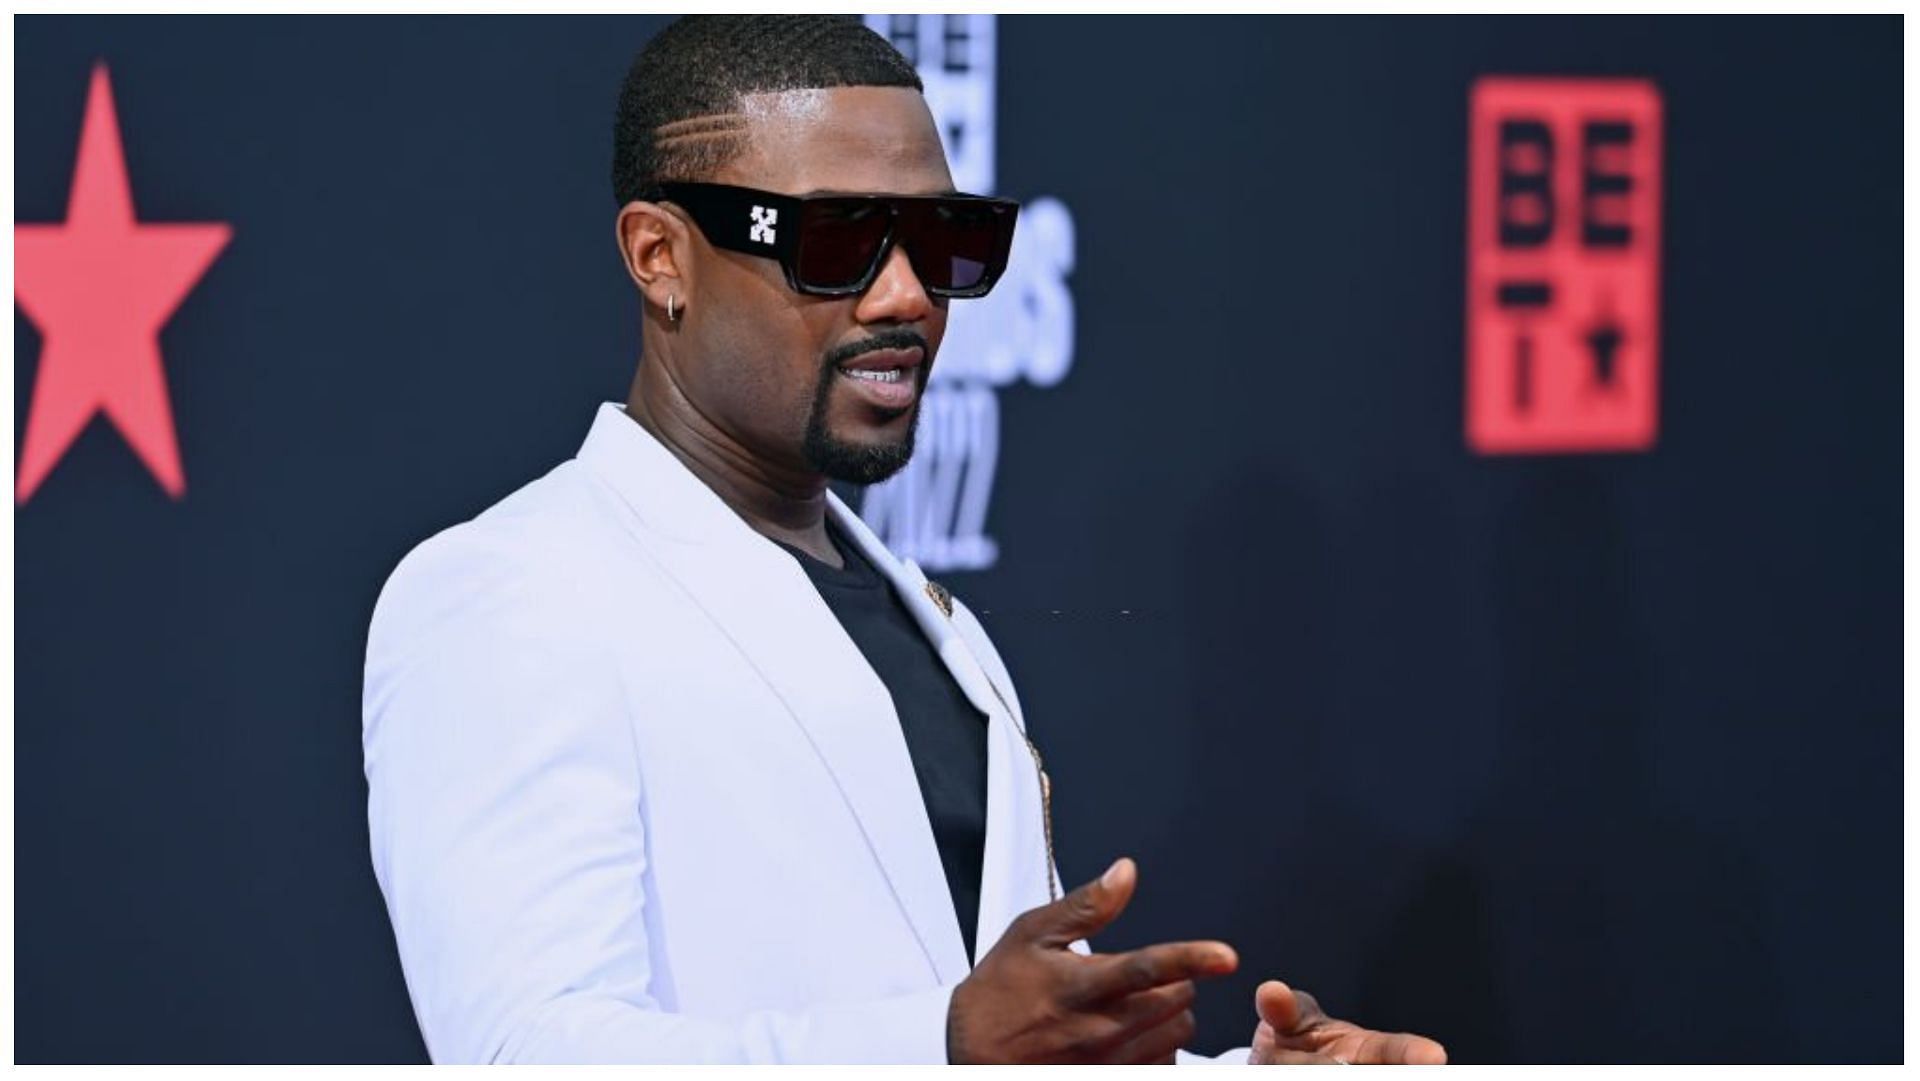 Ray J criticized Kris Jenner in his social media post (Image via Paras Griffin/Getty Images)